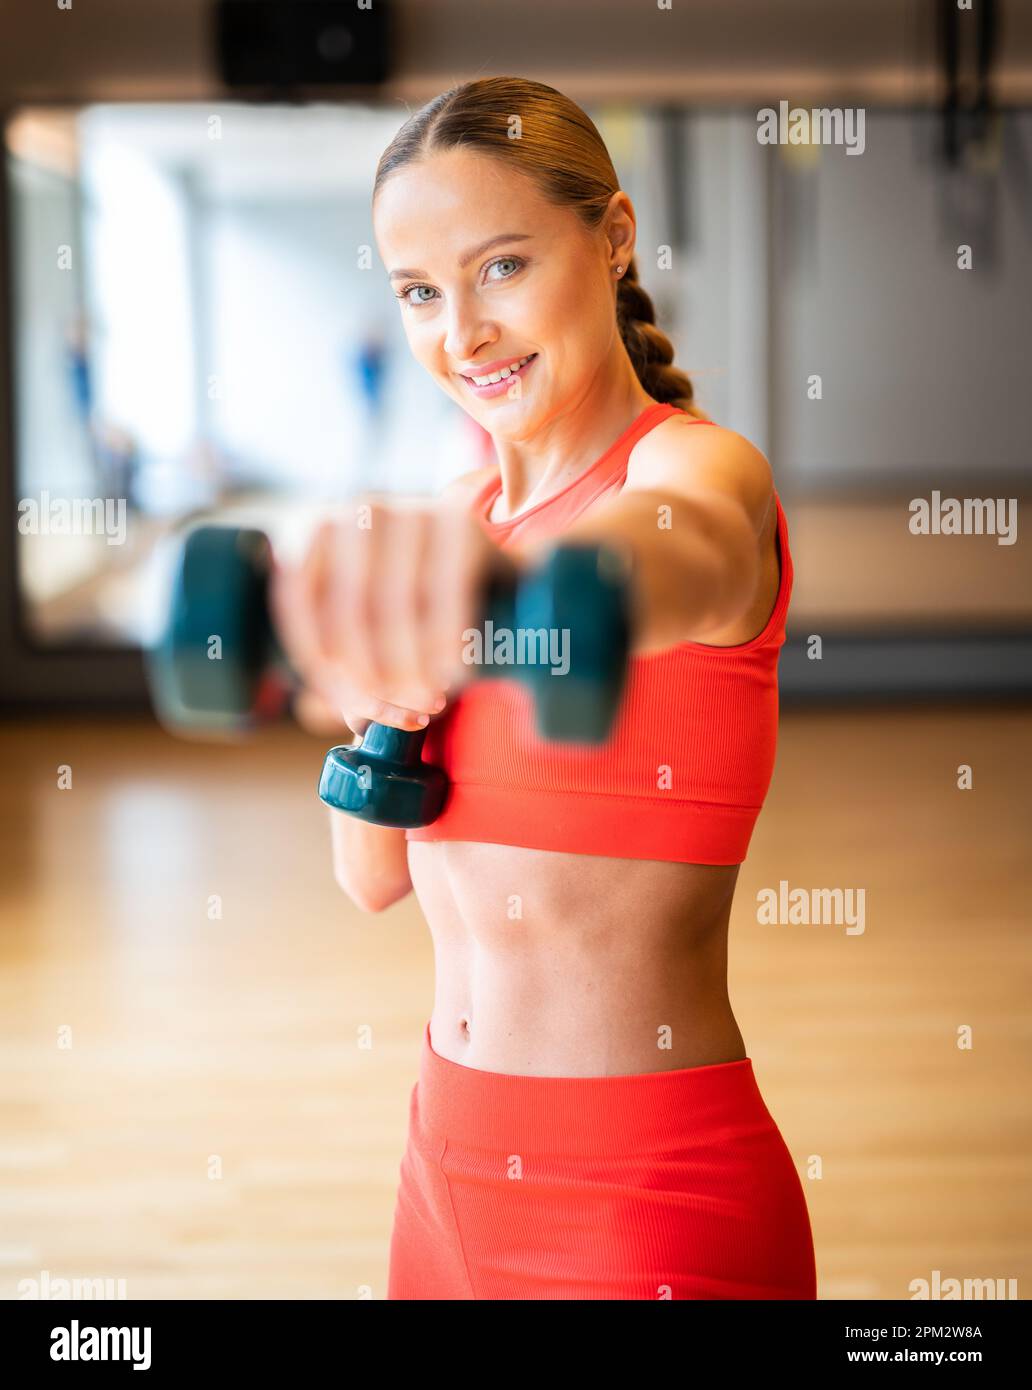 Beautiful young woman lifting dumbbells in a gym Stock Photo